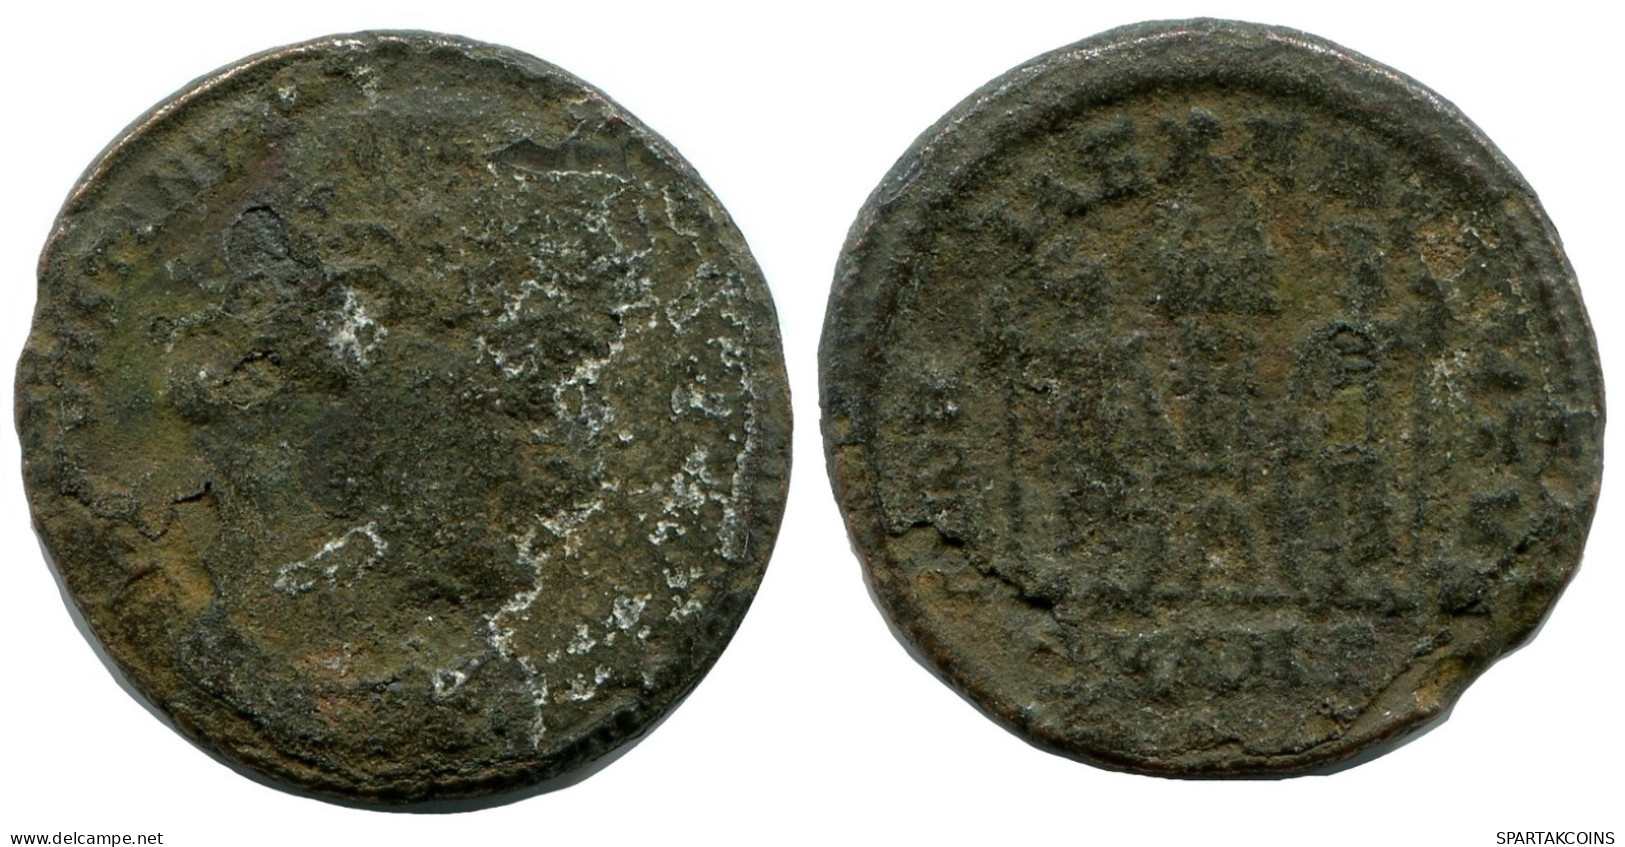 CONSTANTINE I MINTED IN ANTIOCH FROM THE ROYAL ONTARIO MUSEUM #ANC10713.14.E.A - The Christian Empire (307 AD To 363 AD)